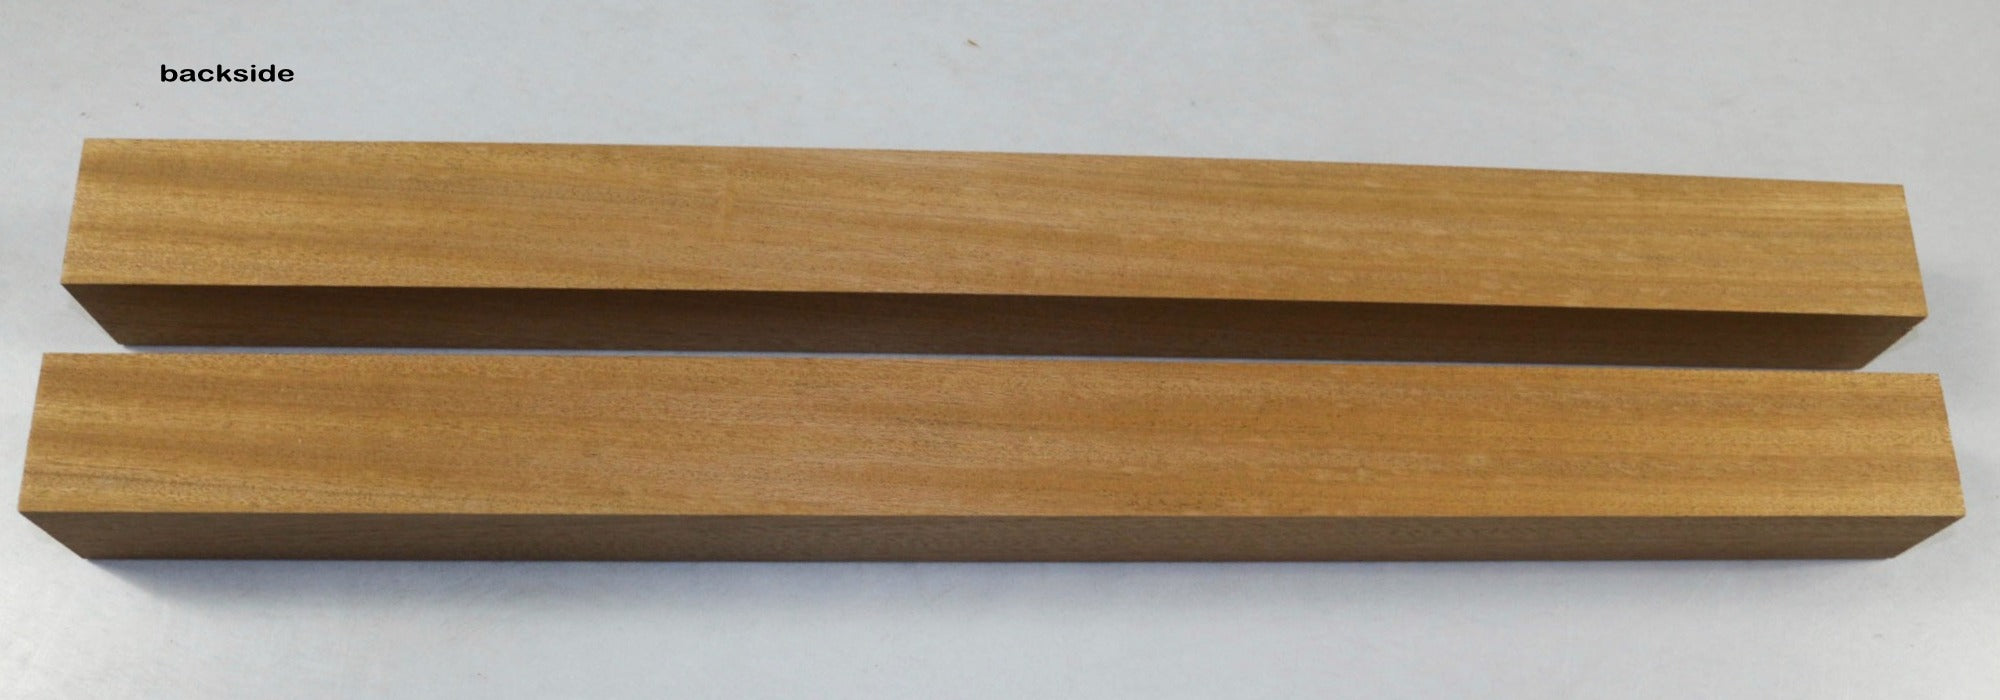 2 Sapele spindles 1.9" x 23.5" long  - Stock# 2-9790